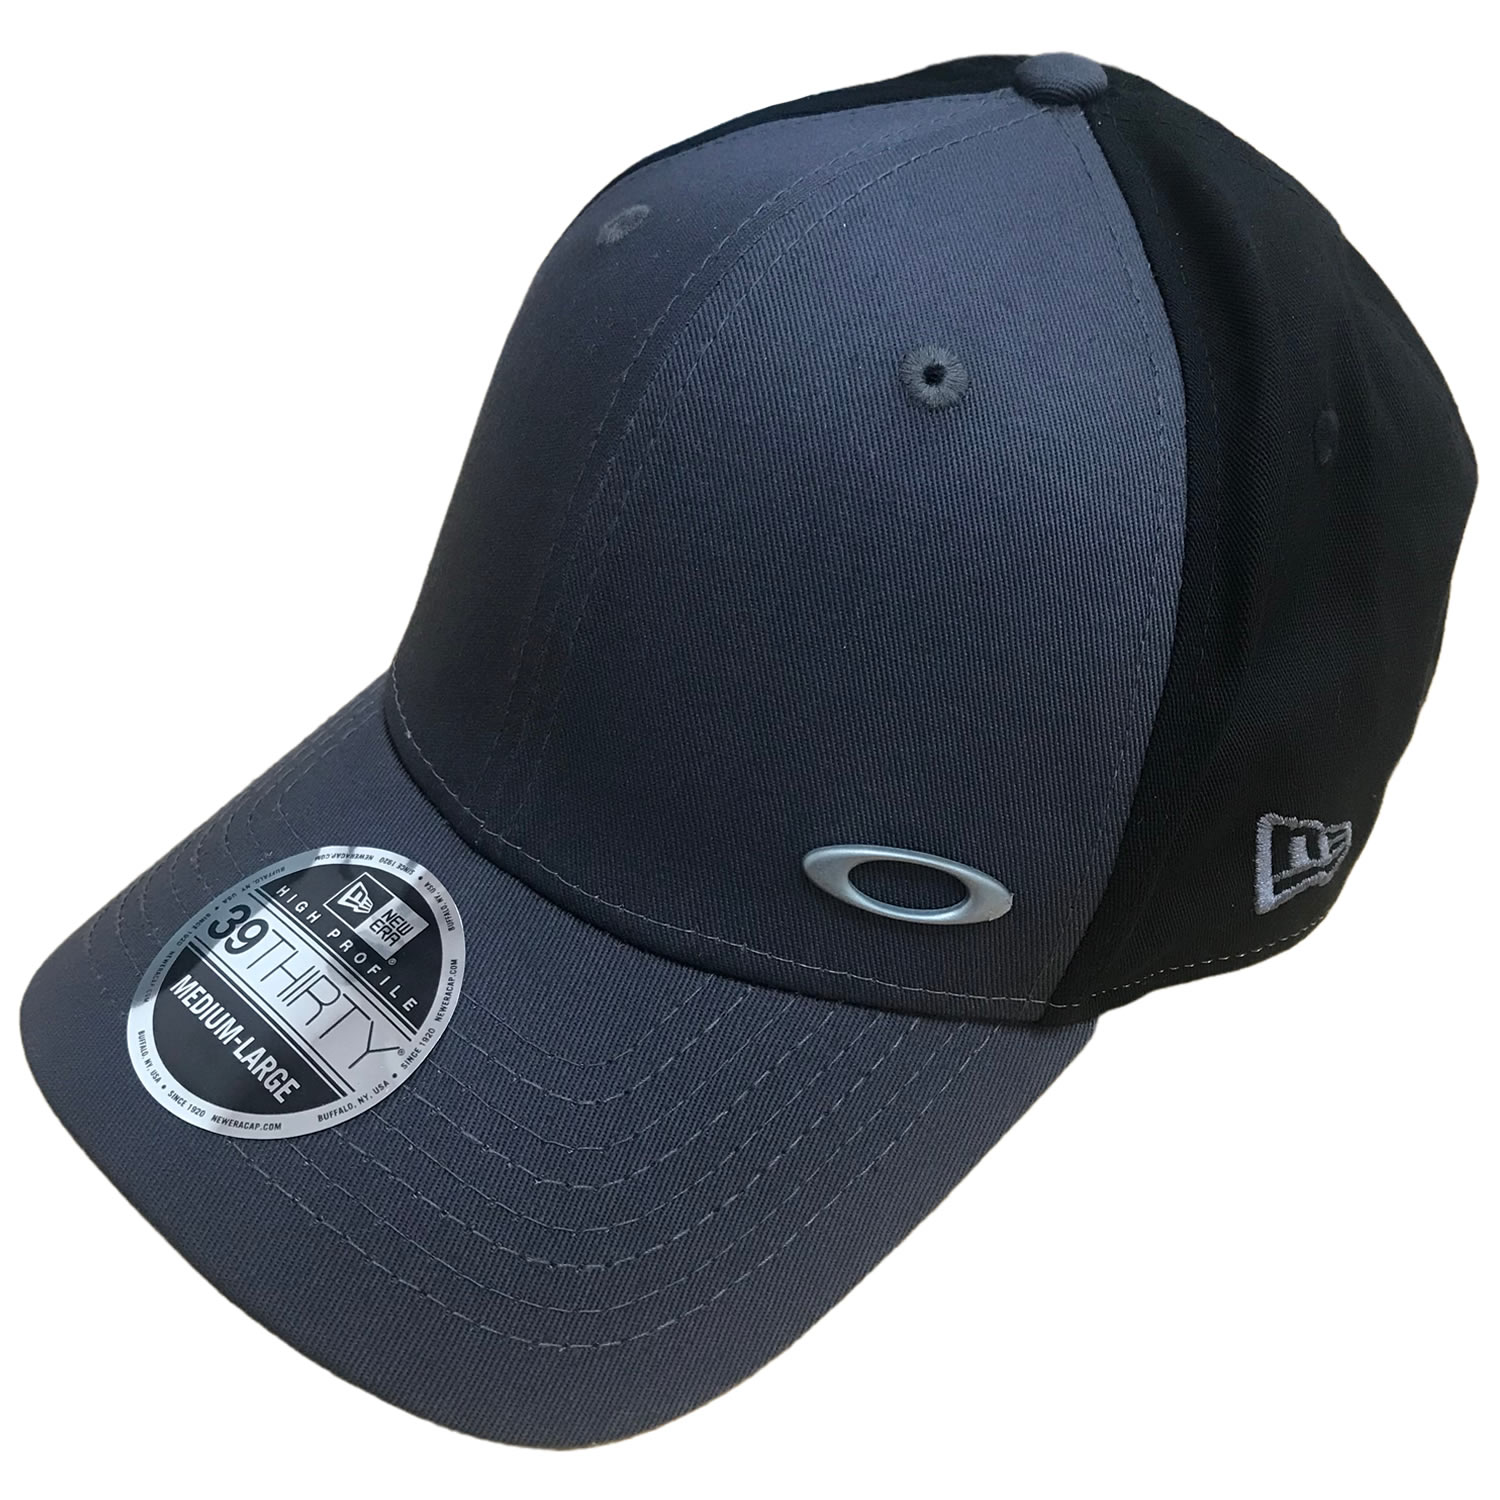 Oakley Tinfoil Fitted Baseball Cap Grigio Scuro | Scottsdale Golf